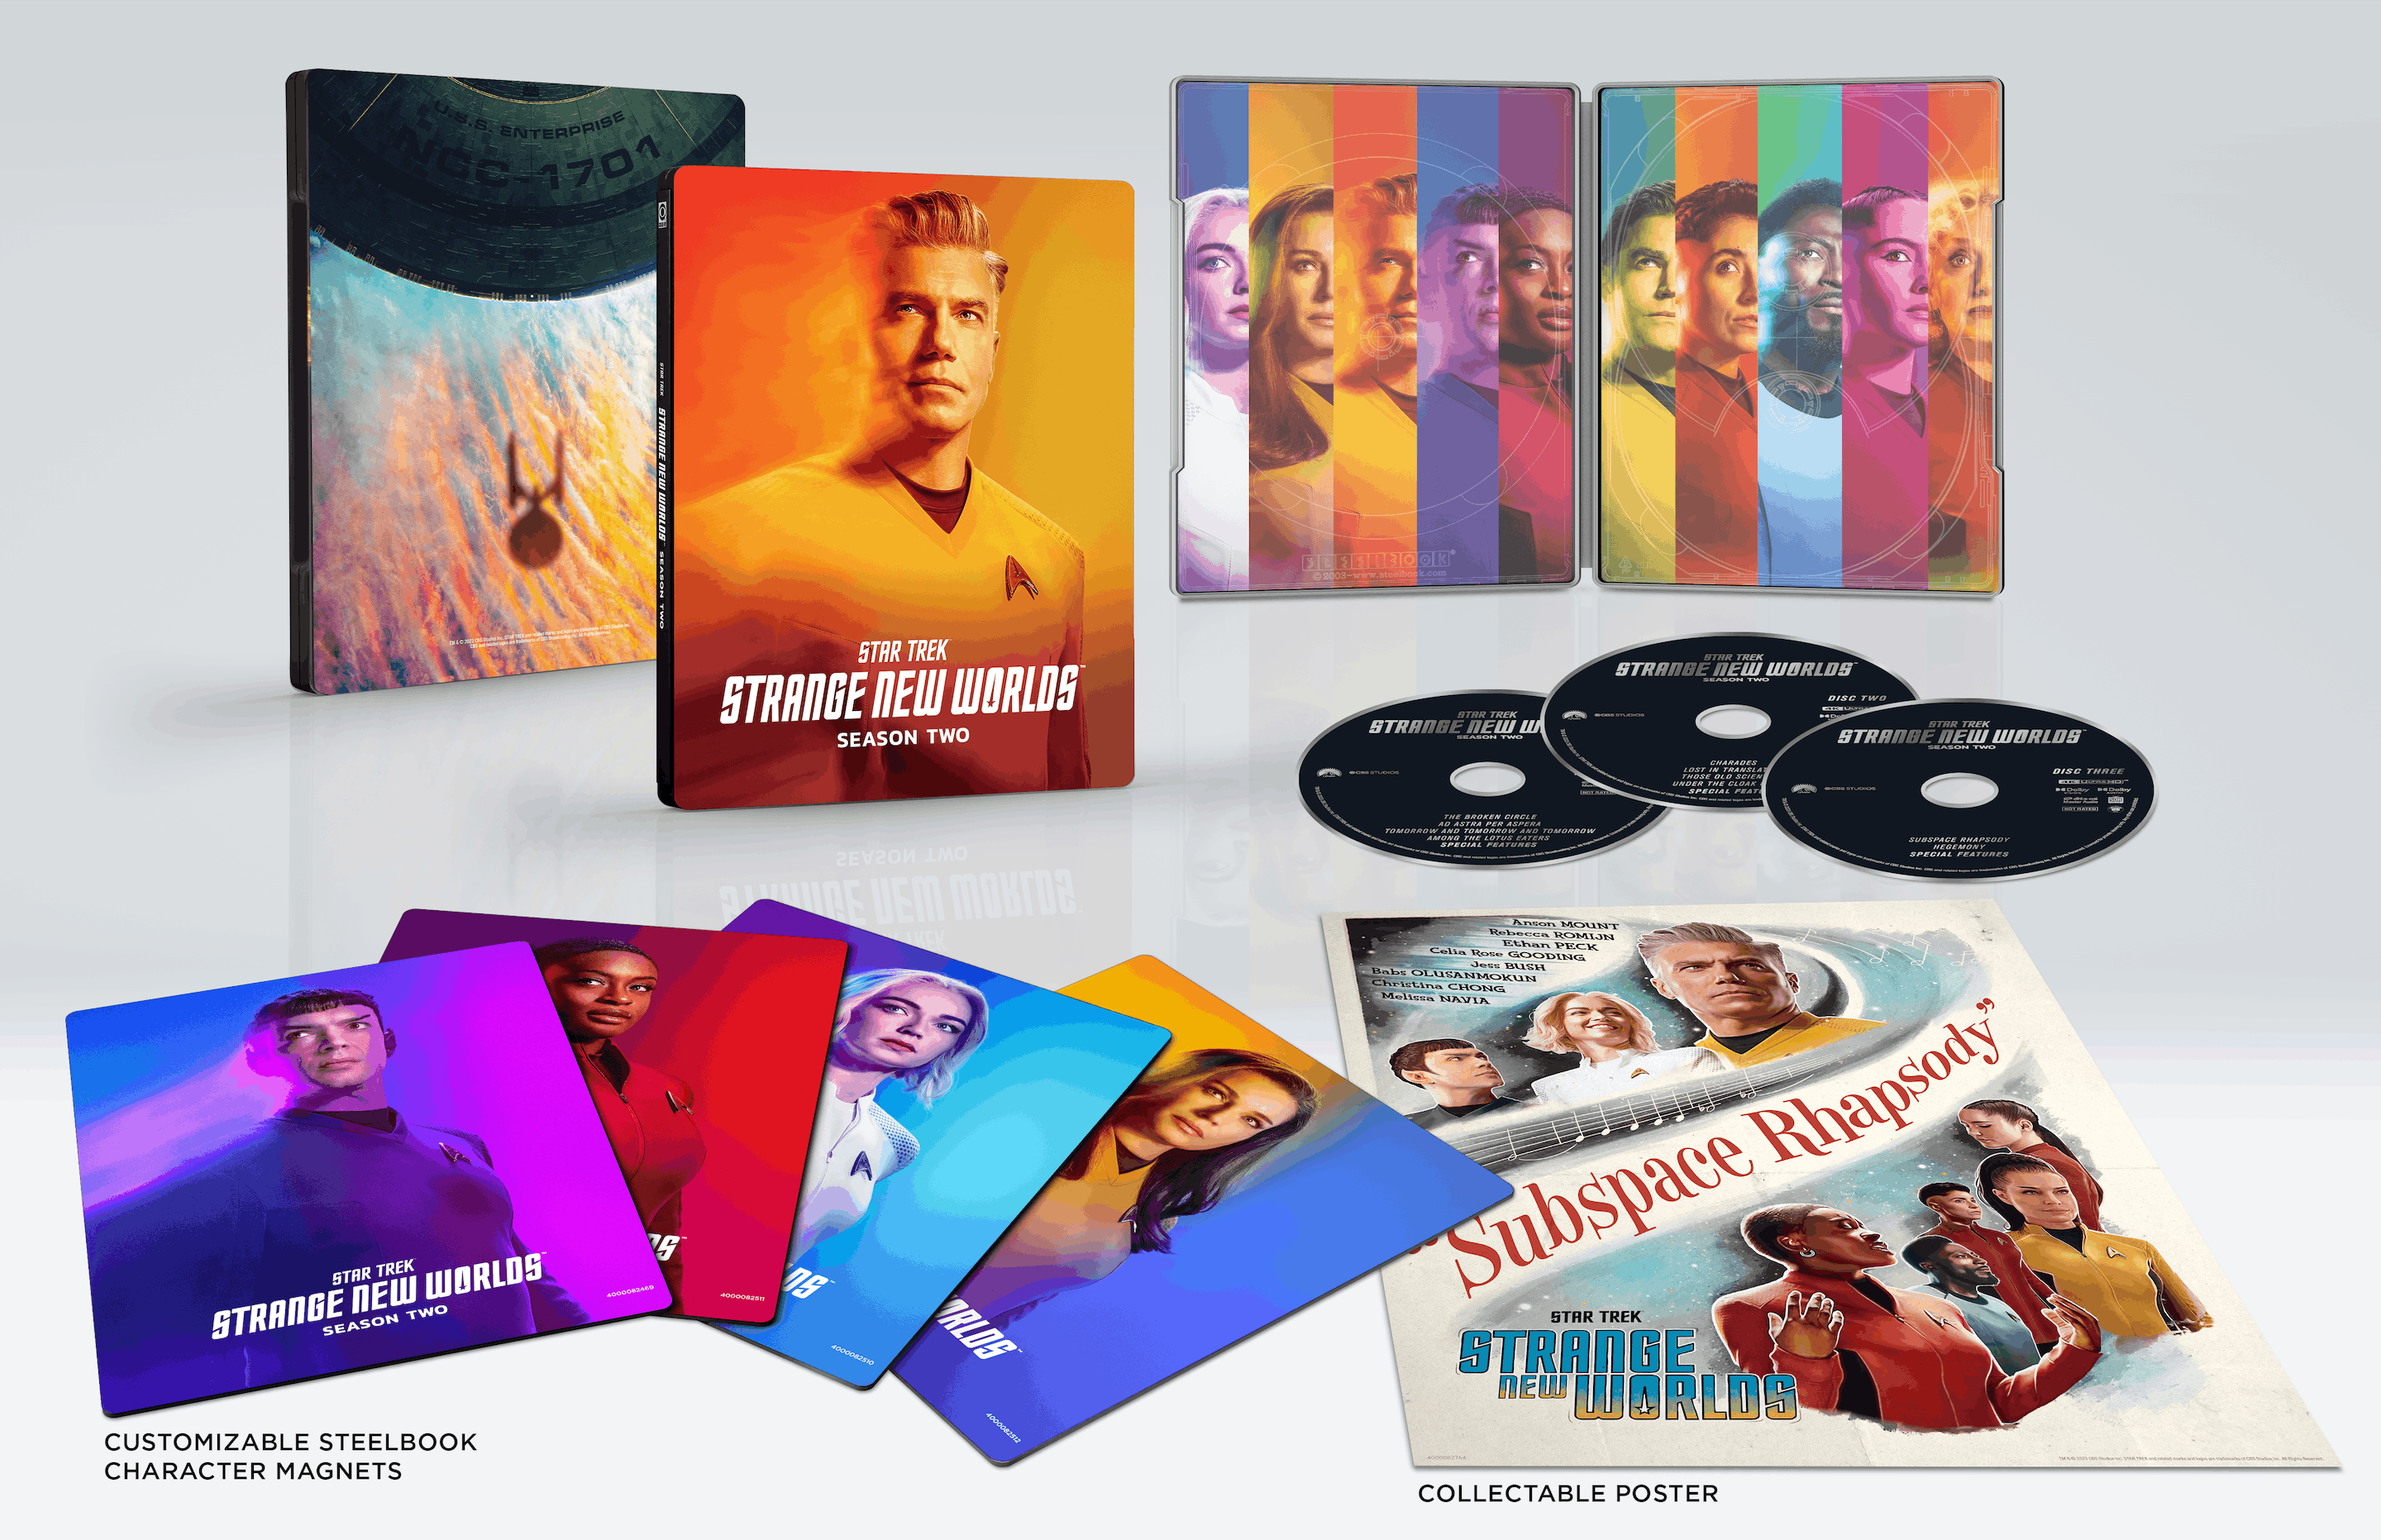 Star Trek: Strange New Worlds Season 2 - 4K UHD Blu-ray Steelbook pack shot with customizable character magnets and collectable poster